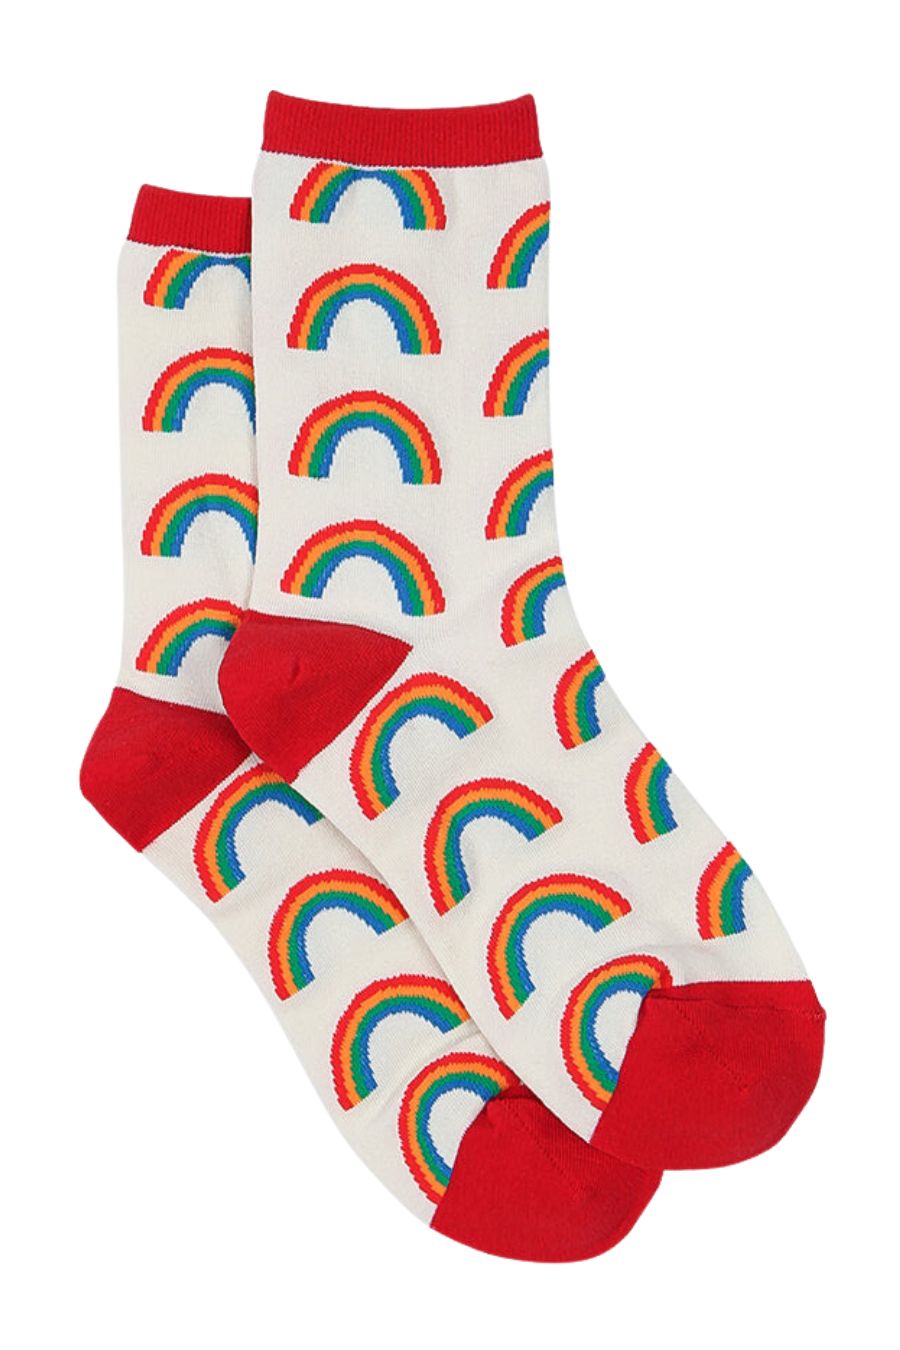 white, red bamboo socks with all over multocoloured rainbows